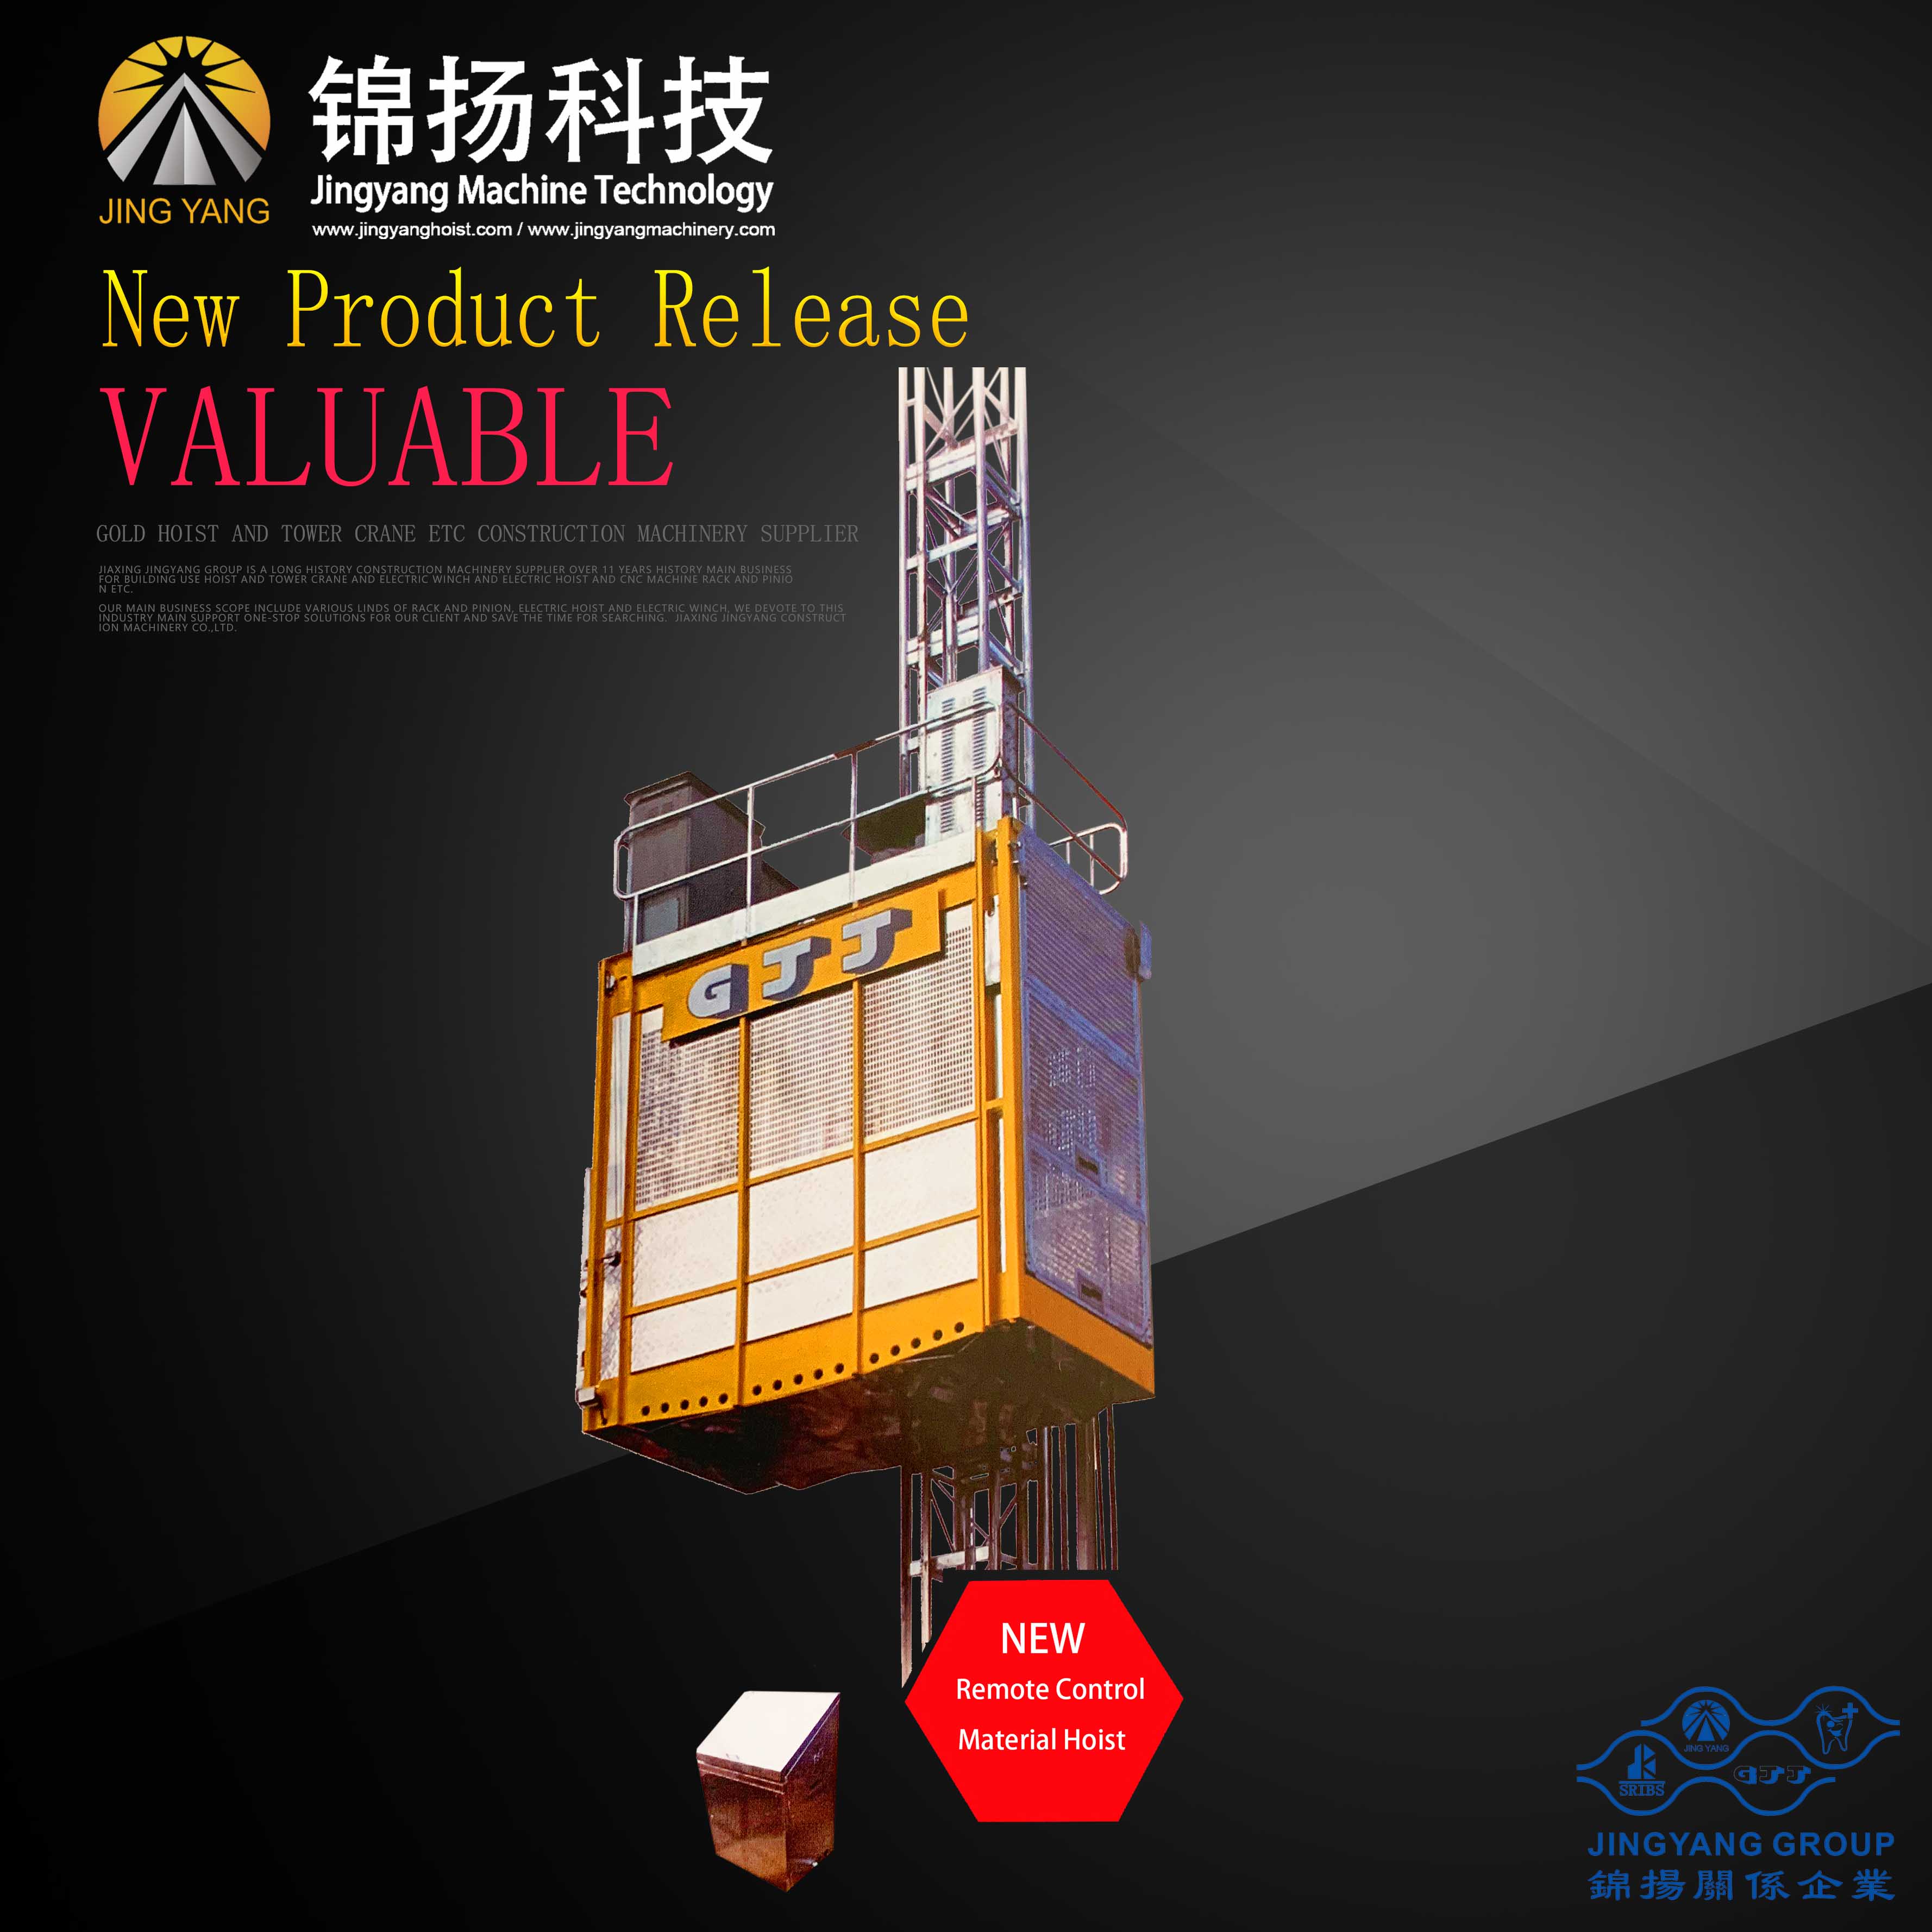 Remote control material hoist Featured Image